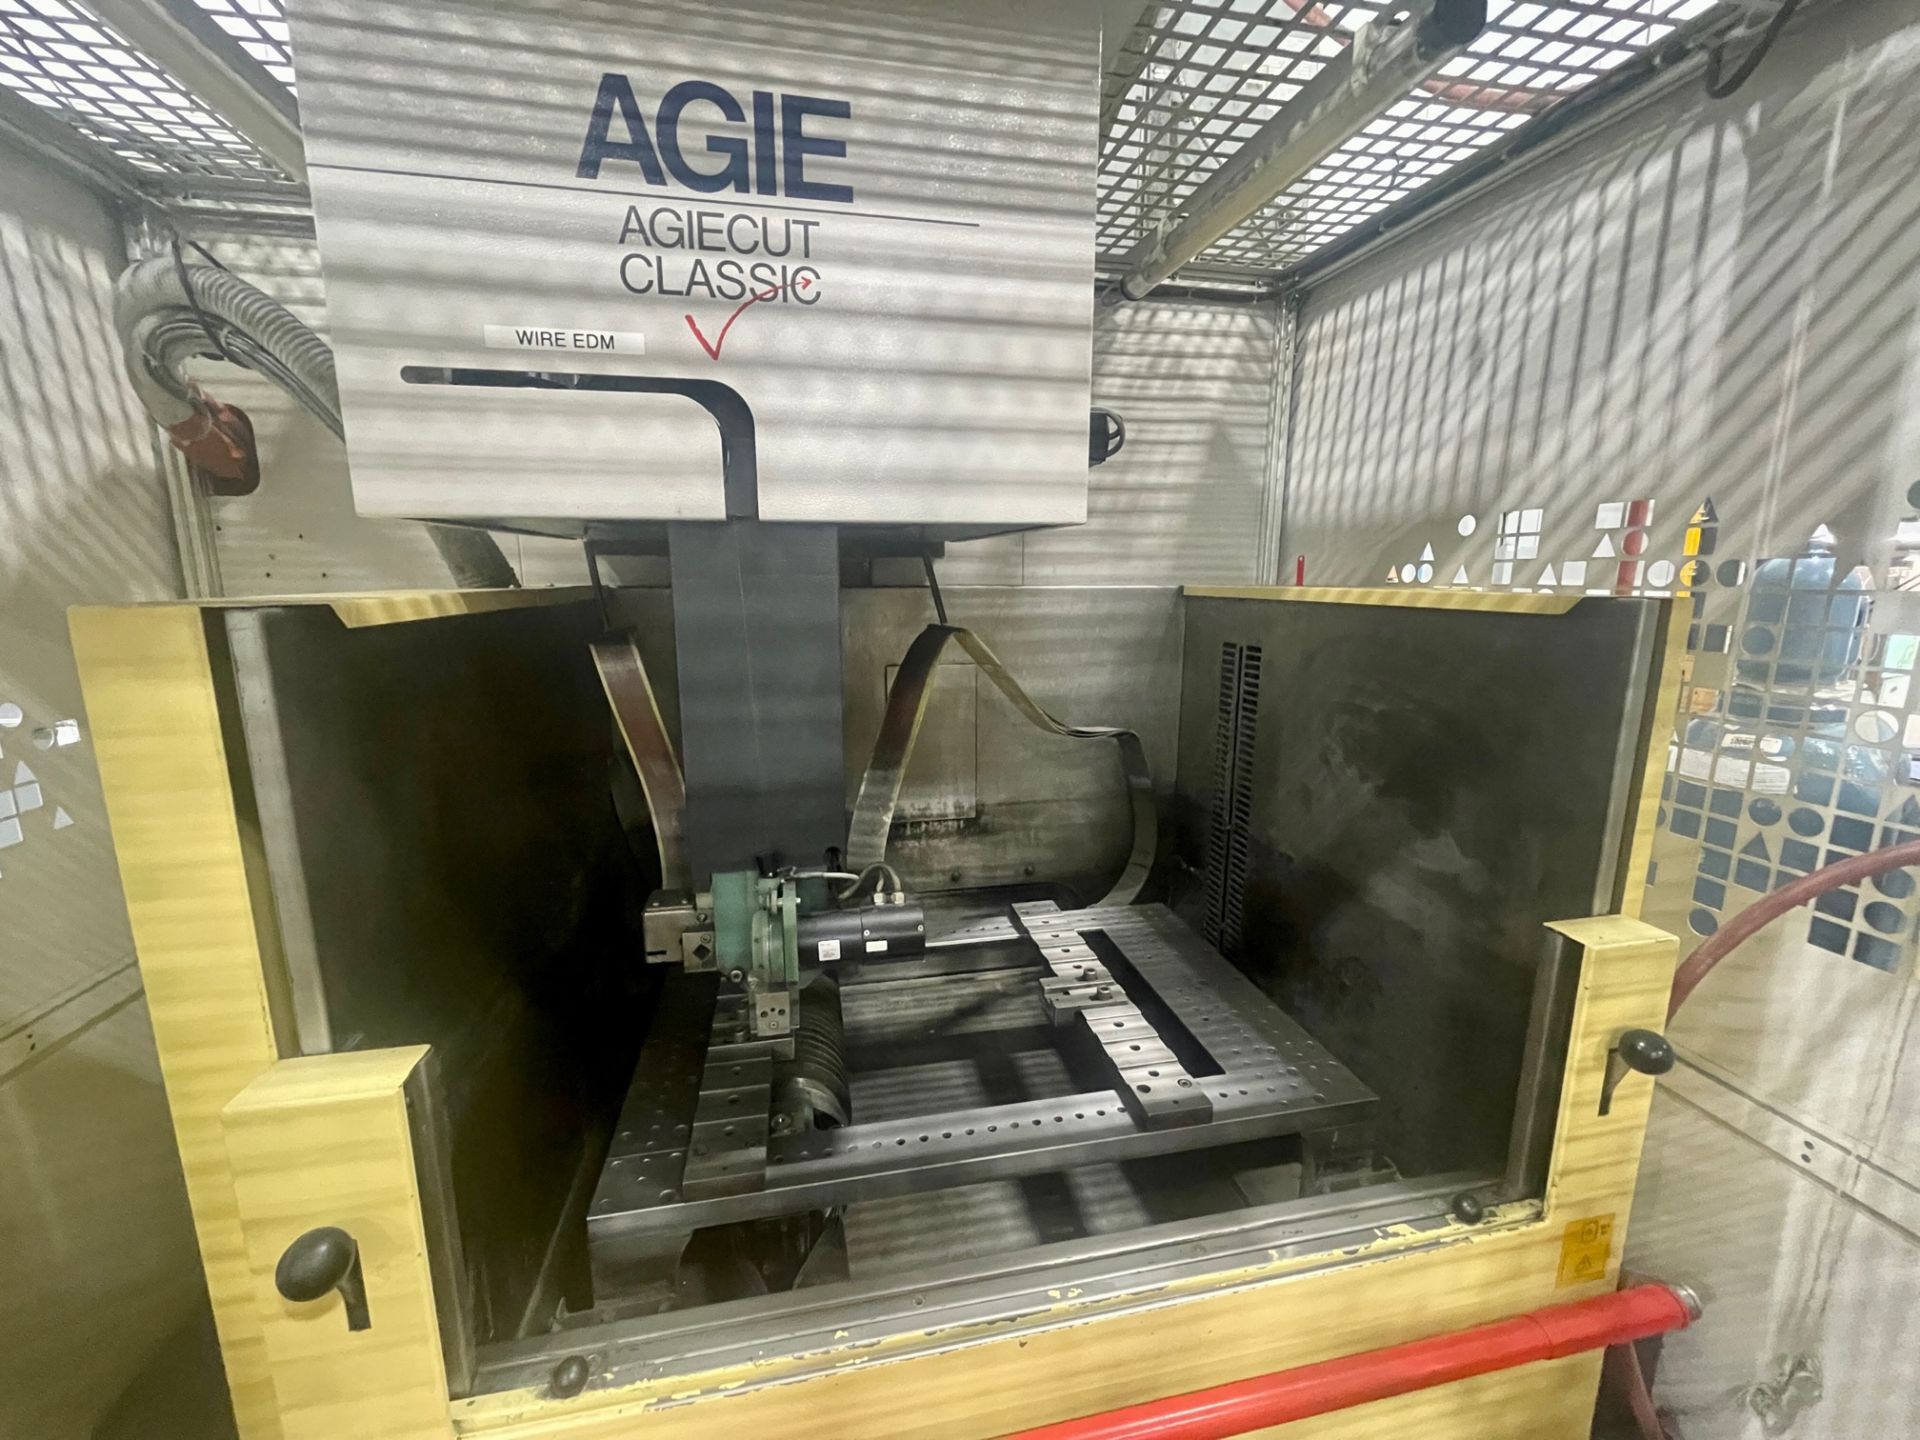 2007 AGIECUT CLASSIC V3 / WIRE EDM / SERIES 73 / SN: C33.203 / WEIGHT = 8,600 / 3 PHASE 400